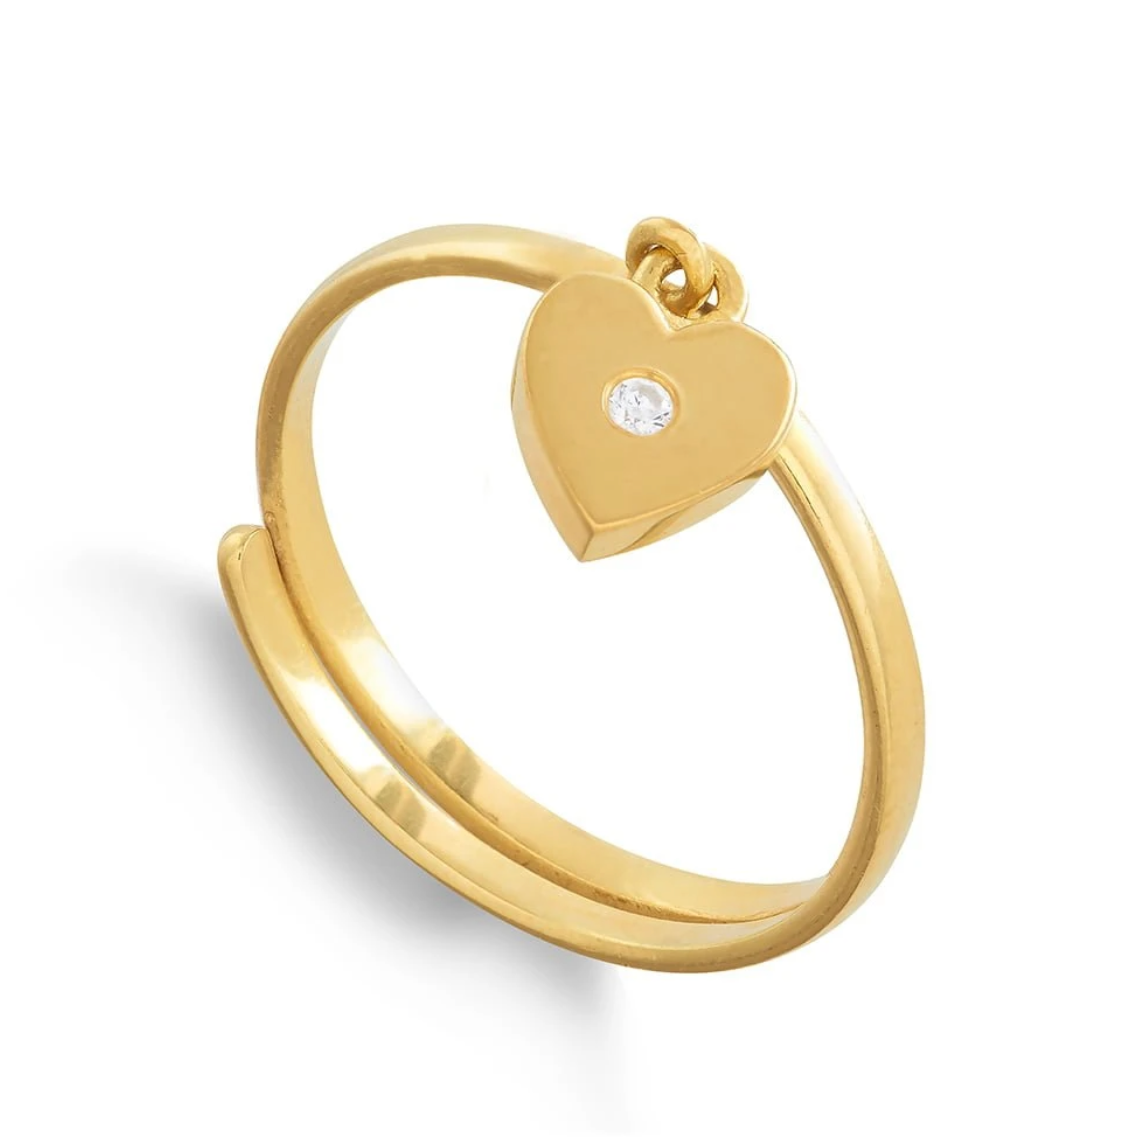 Supersonic Heart Charm Ring - Gold